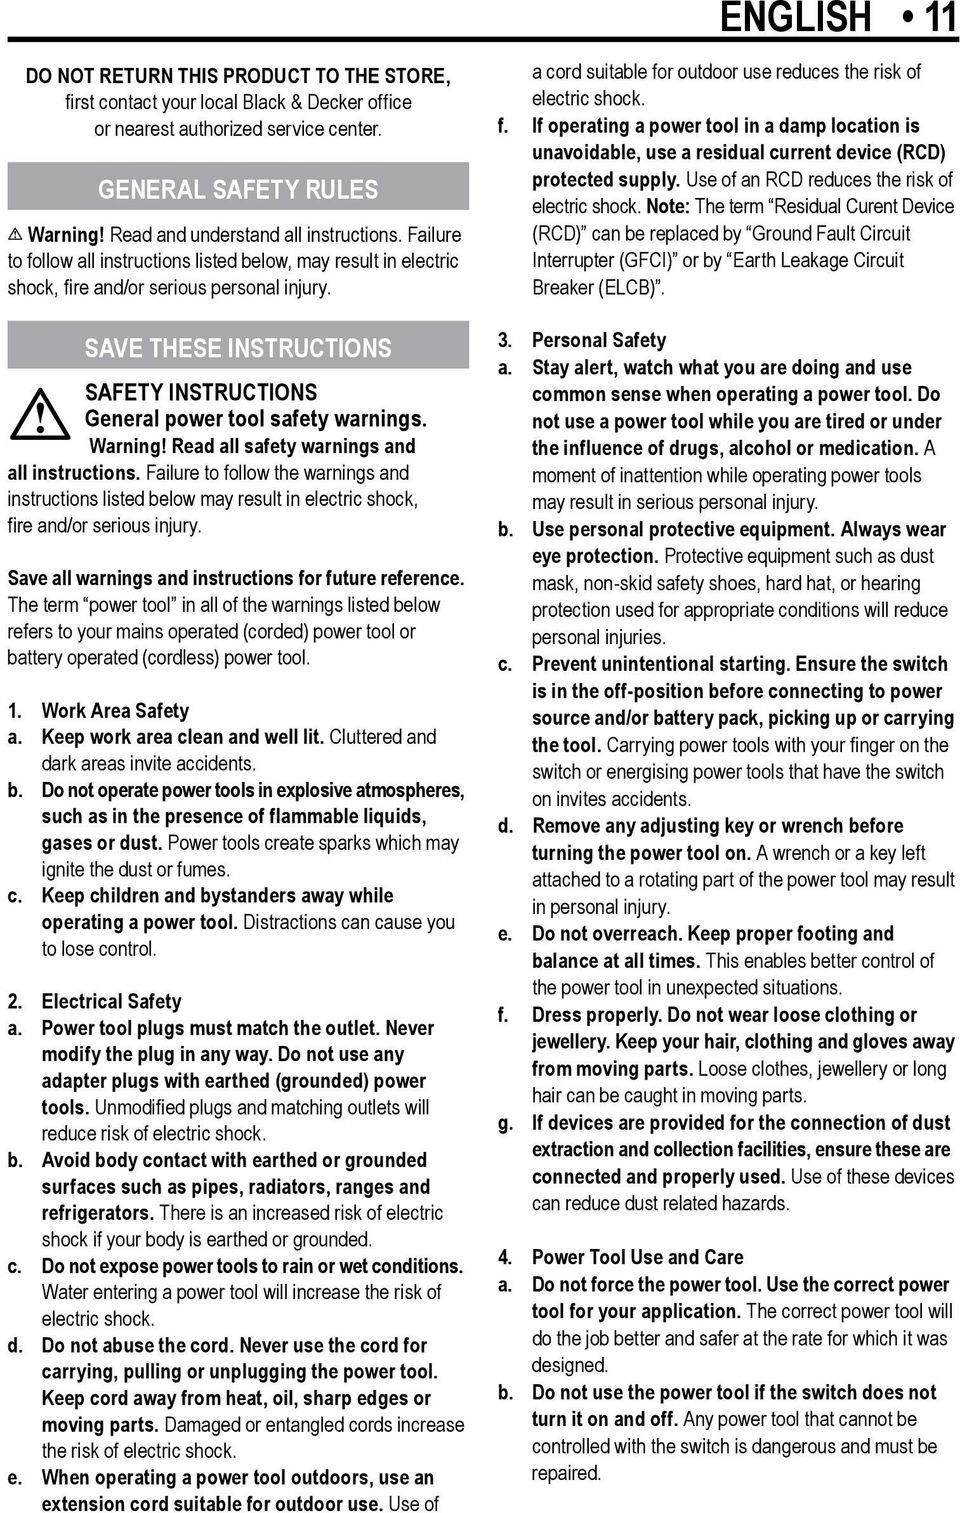 SAVE THESE INSTRUCTIONS SAFETY INSTRUCTIONS General power tool safety warnings. Warning! Read all safety warnings and all instructions.